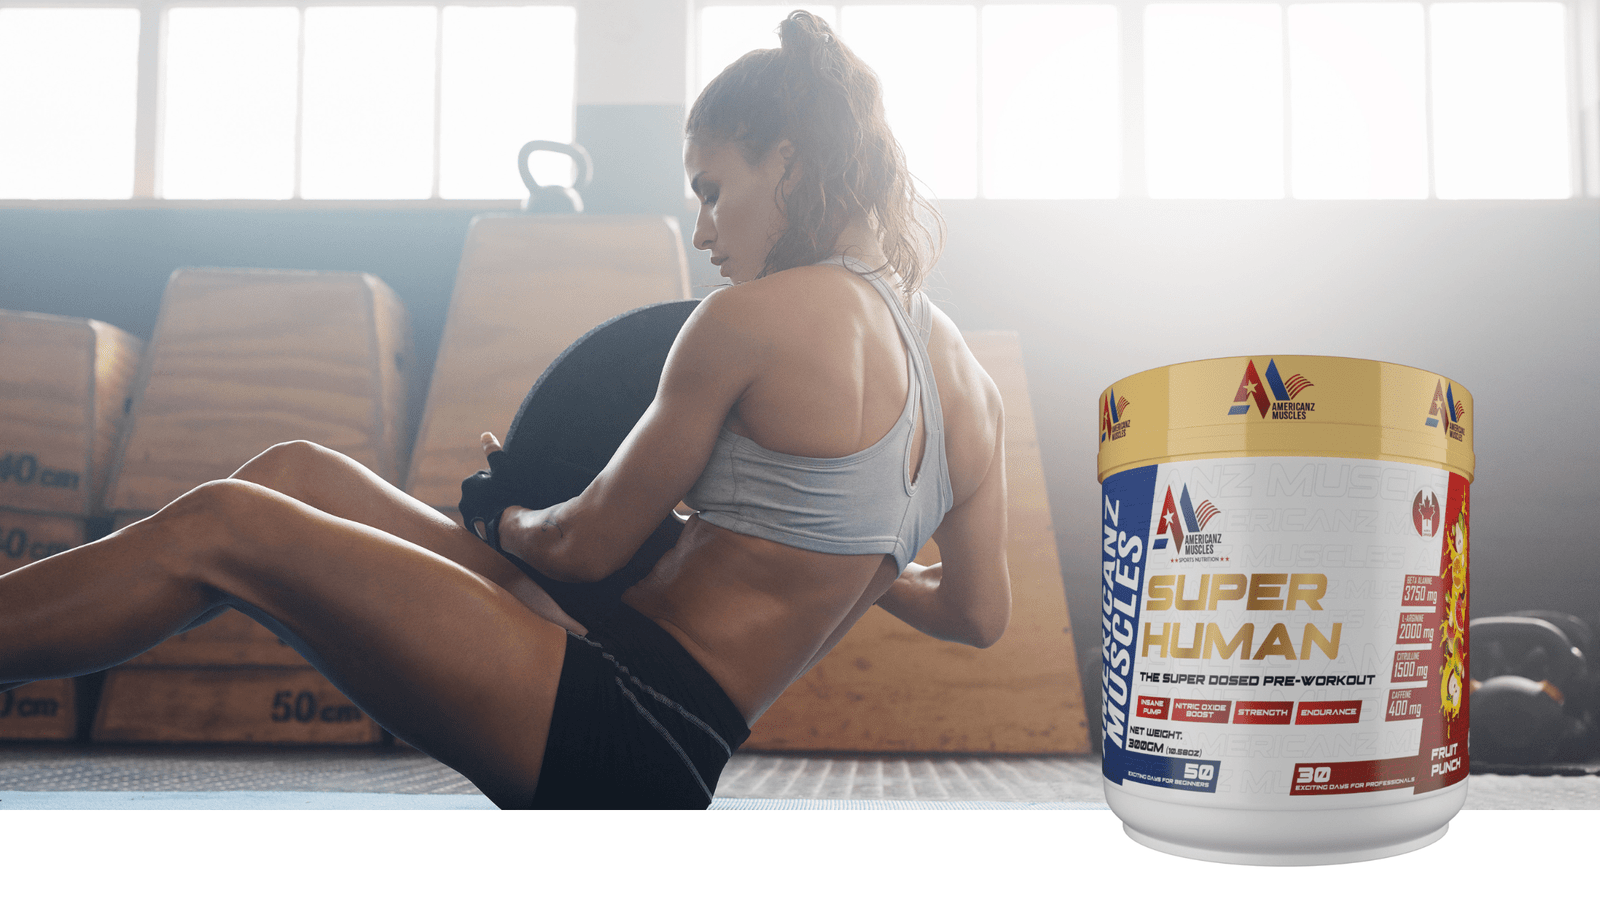 How to Use Americanz Muscles Super Human Pre-Workout